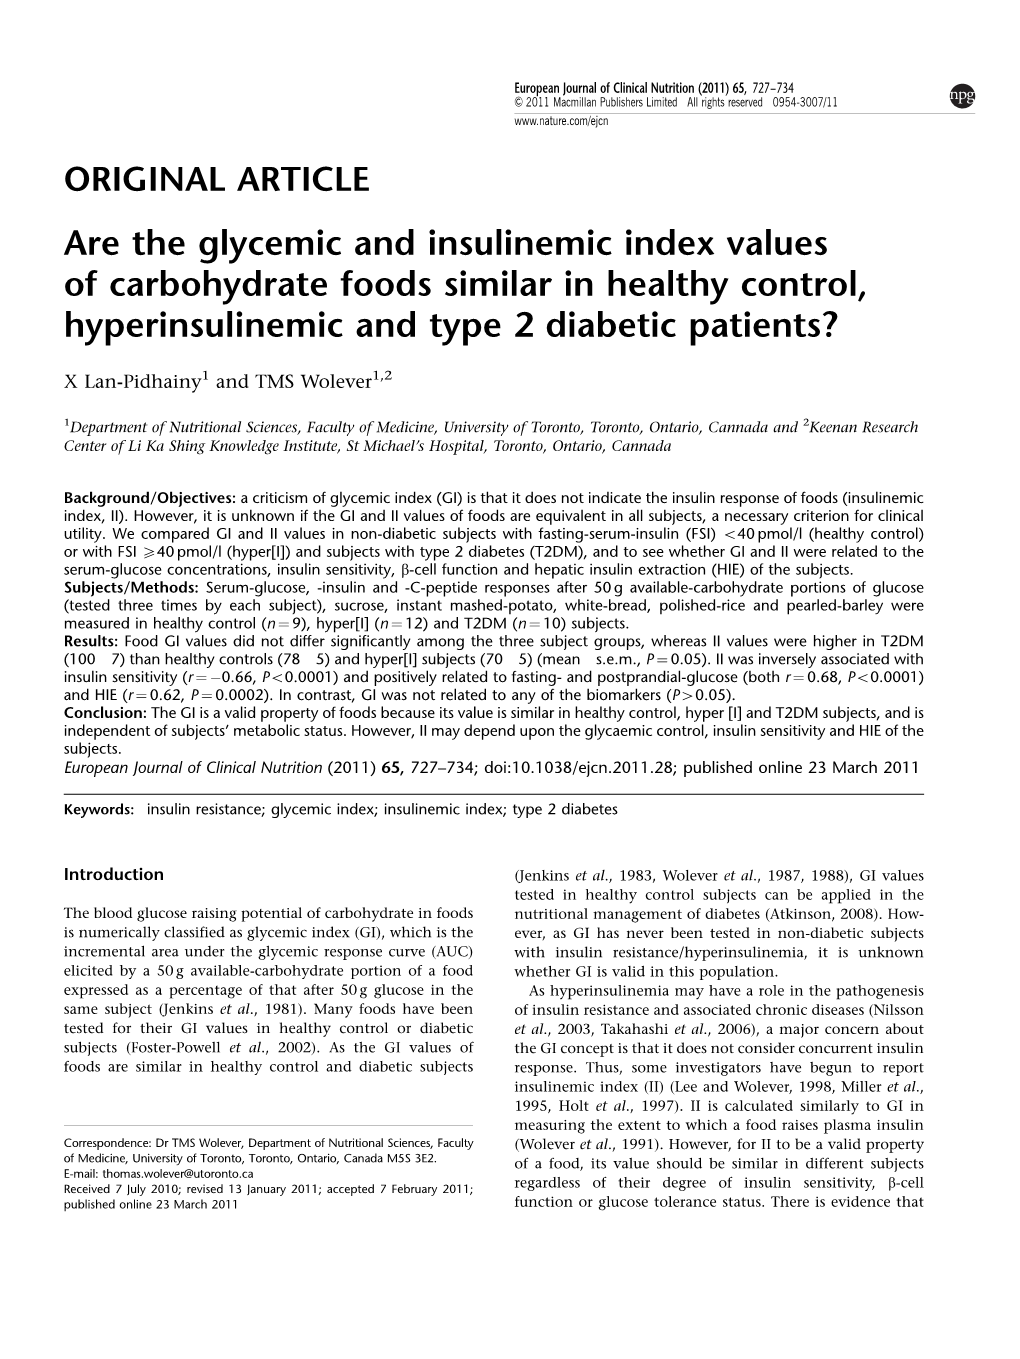 Are the Glycemic and Insulinemic Index Values of Carbohydrate Foods Similar in Healthy Control, Hyperinsulinemic and Type 2 Diabetic Patients?